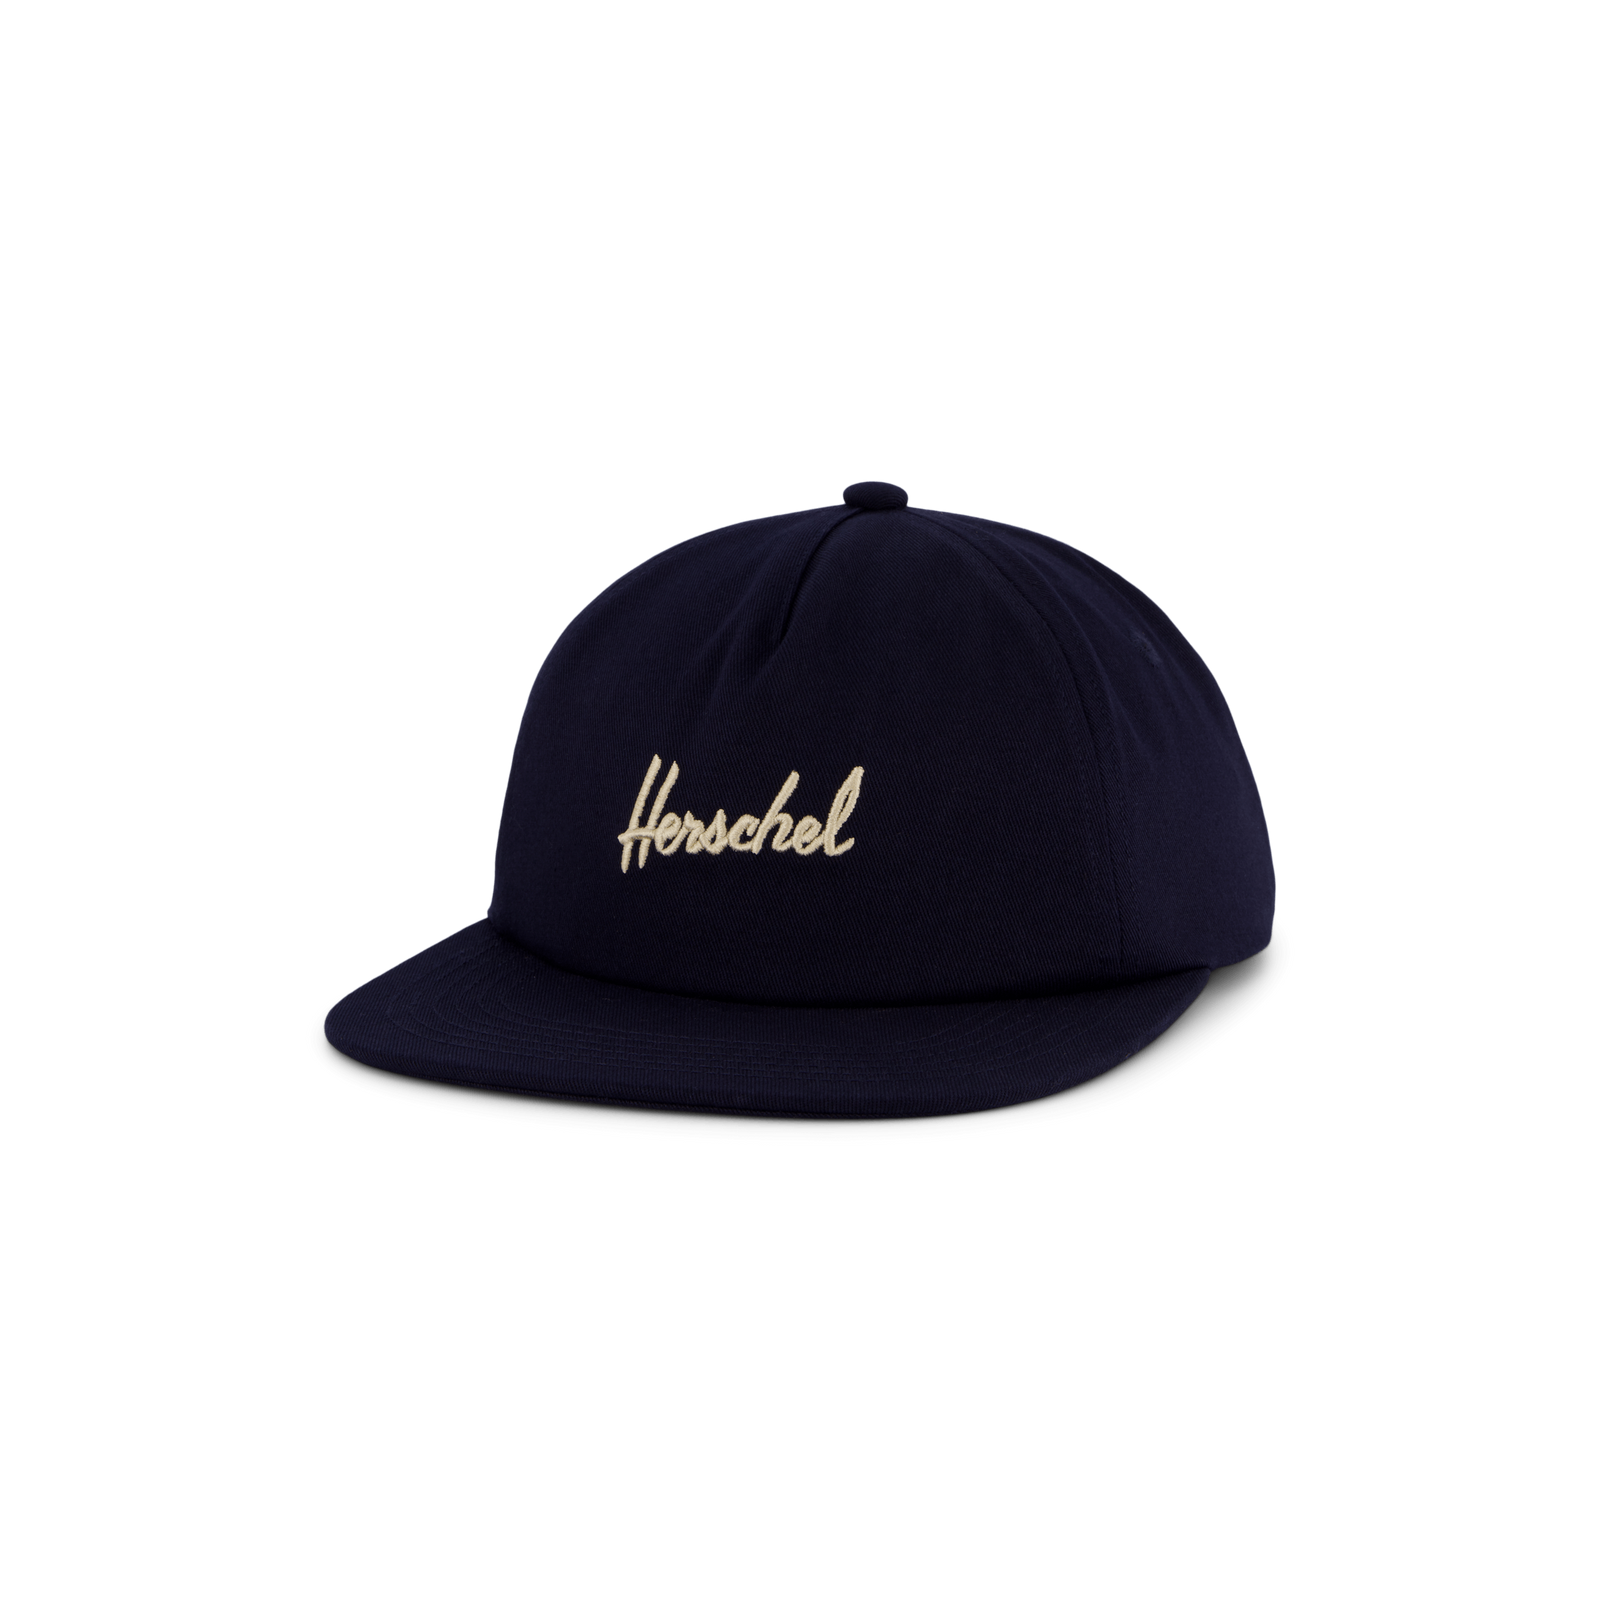 Scout Cap Embroidery Navy/whitecap Gray